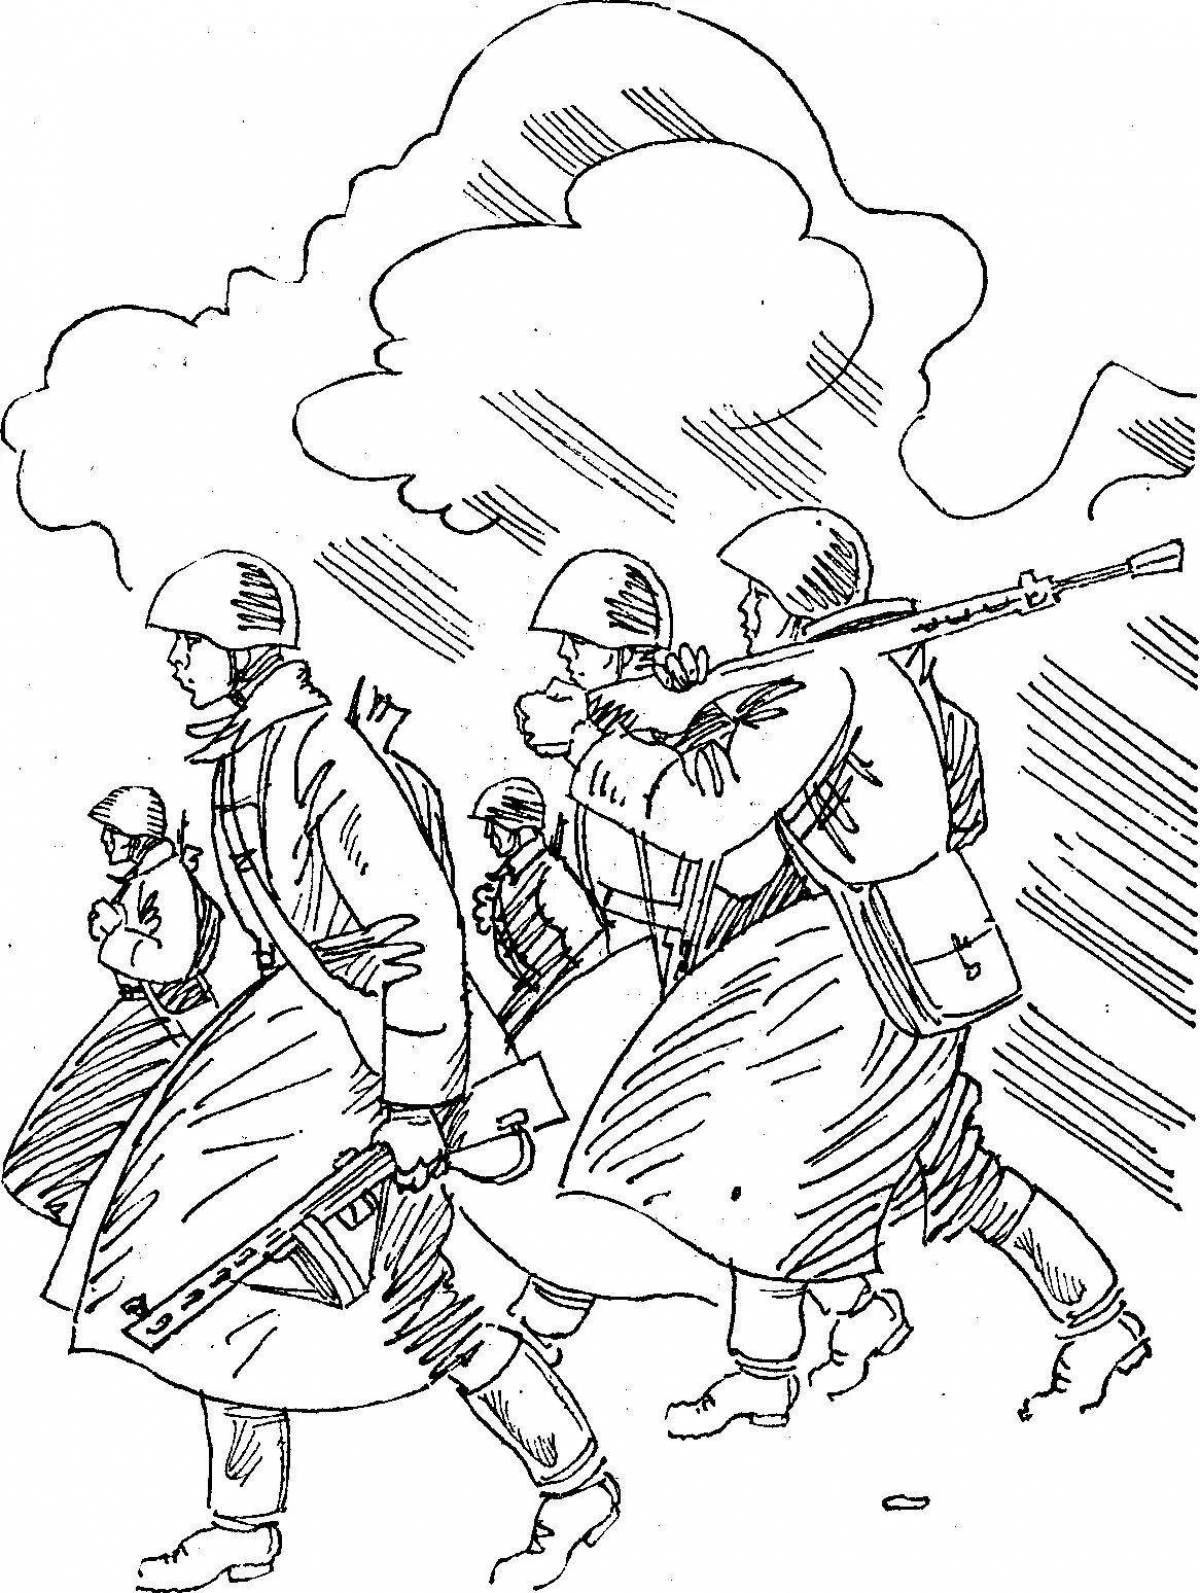 WWII inspirational coloring page